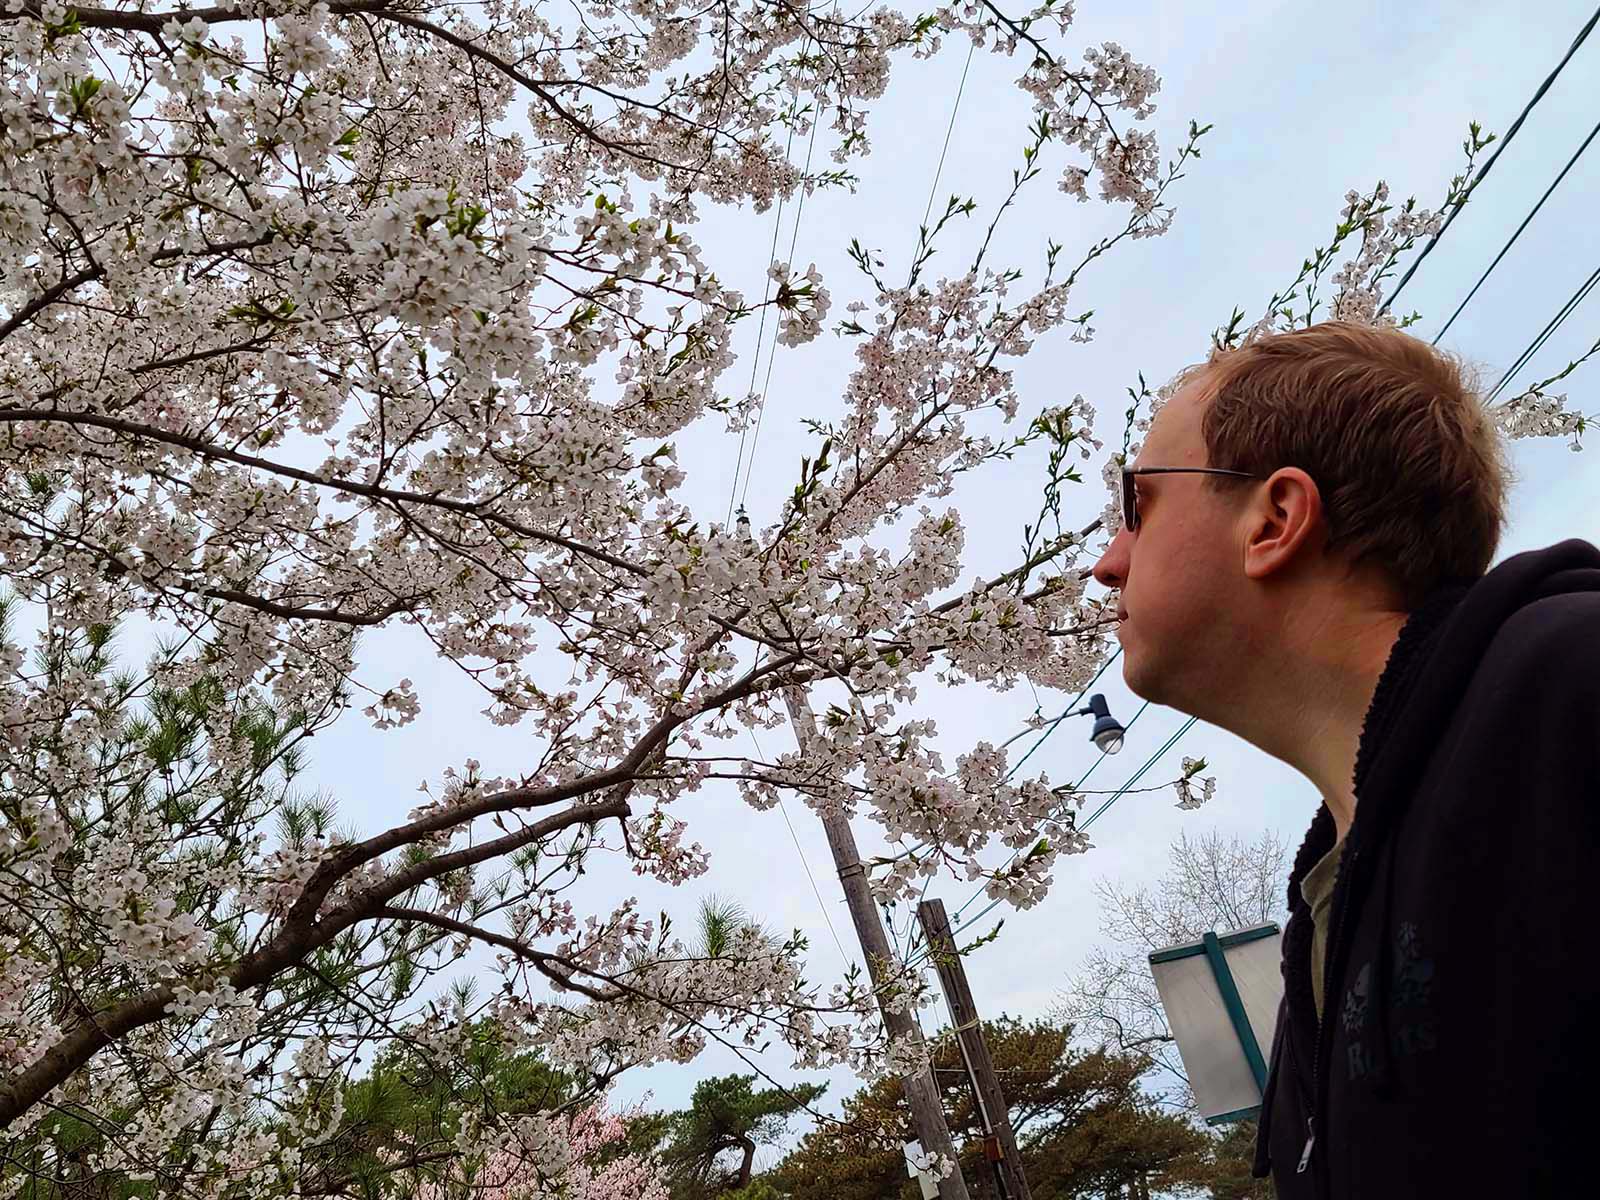 A man looking up at a tree full of cherry blossoms.